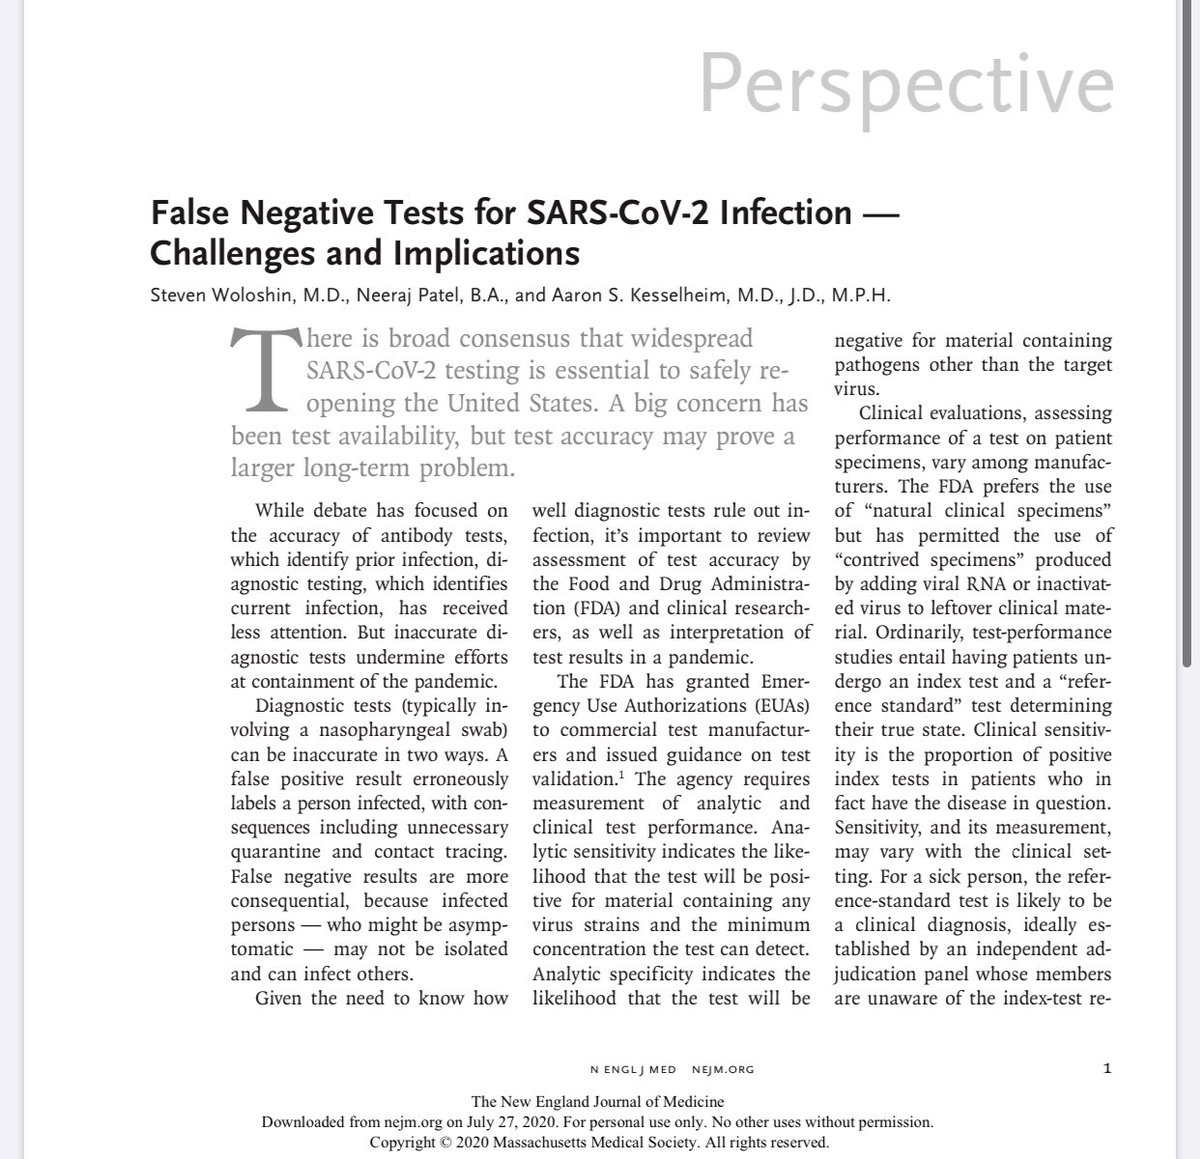 4 False negative tests: Many tests in use aren’t the greatest. Both for detecting infection or for detecting history of infection. So someone could actually have symptomatic COVID and is told they don’t have it.  https://www.nejm.org/doi/full/10.1056/NEJMp2015897